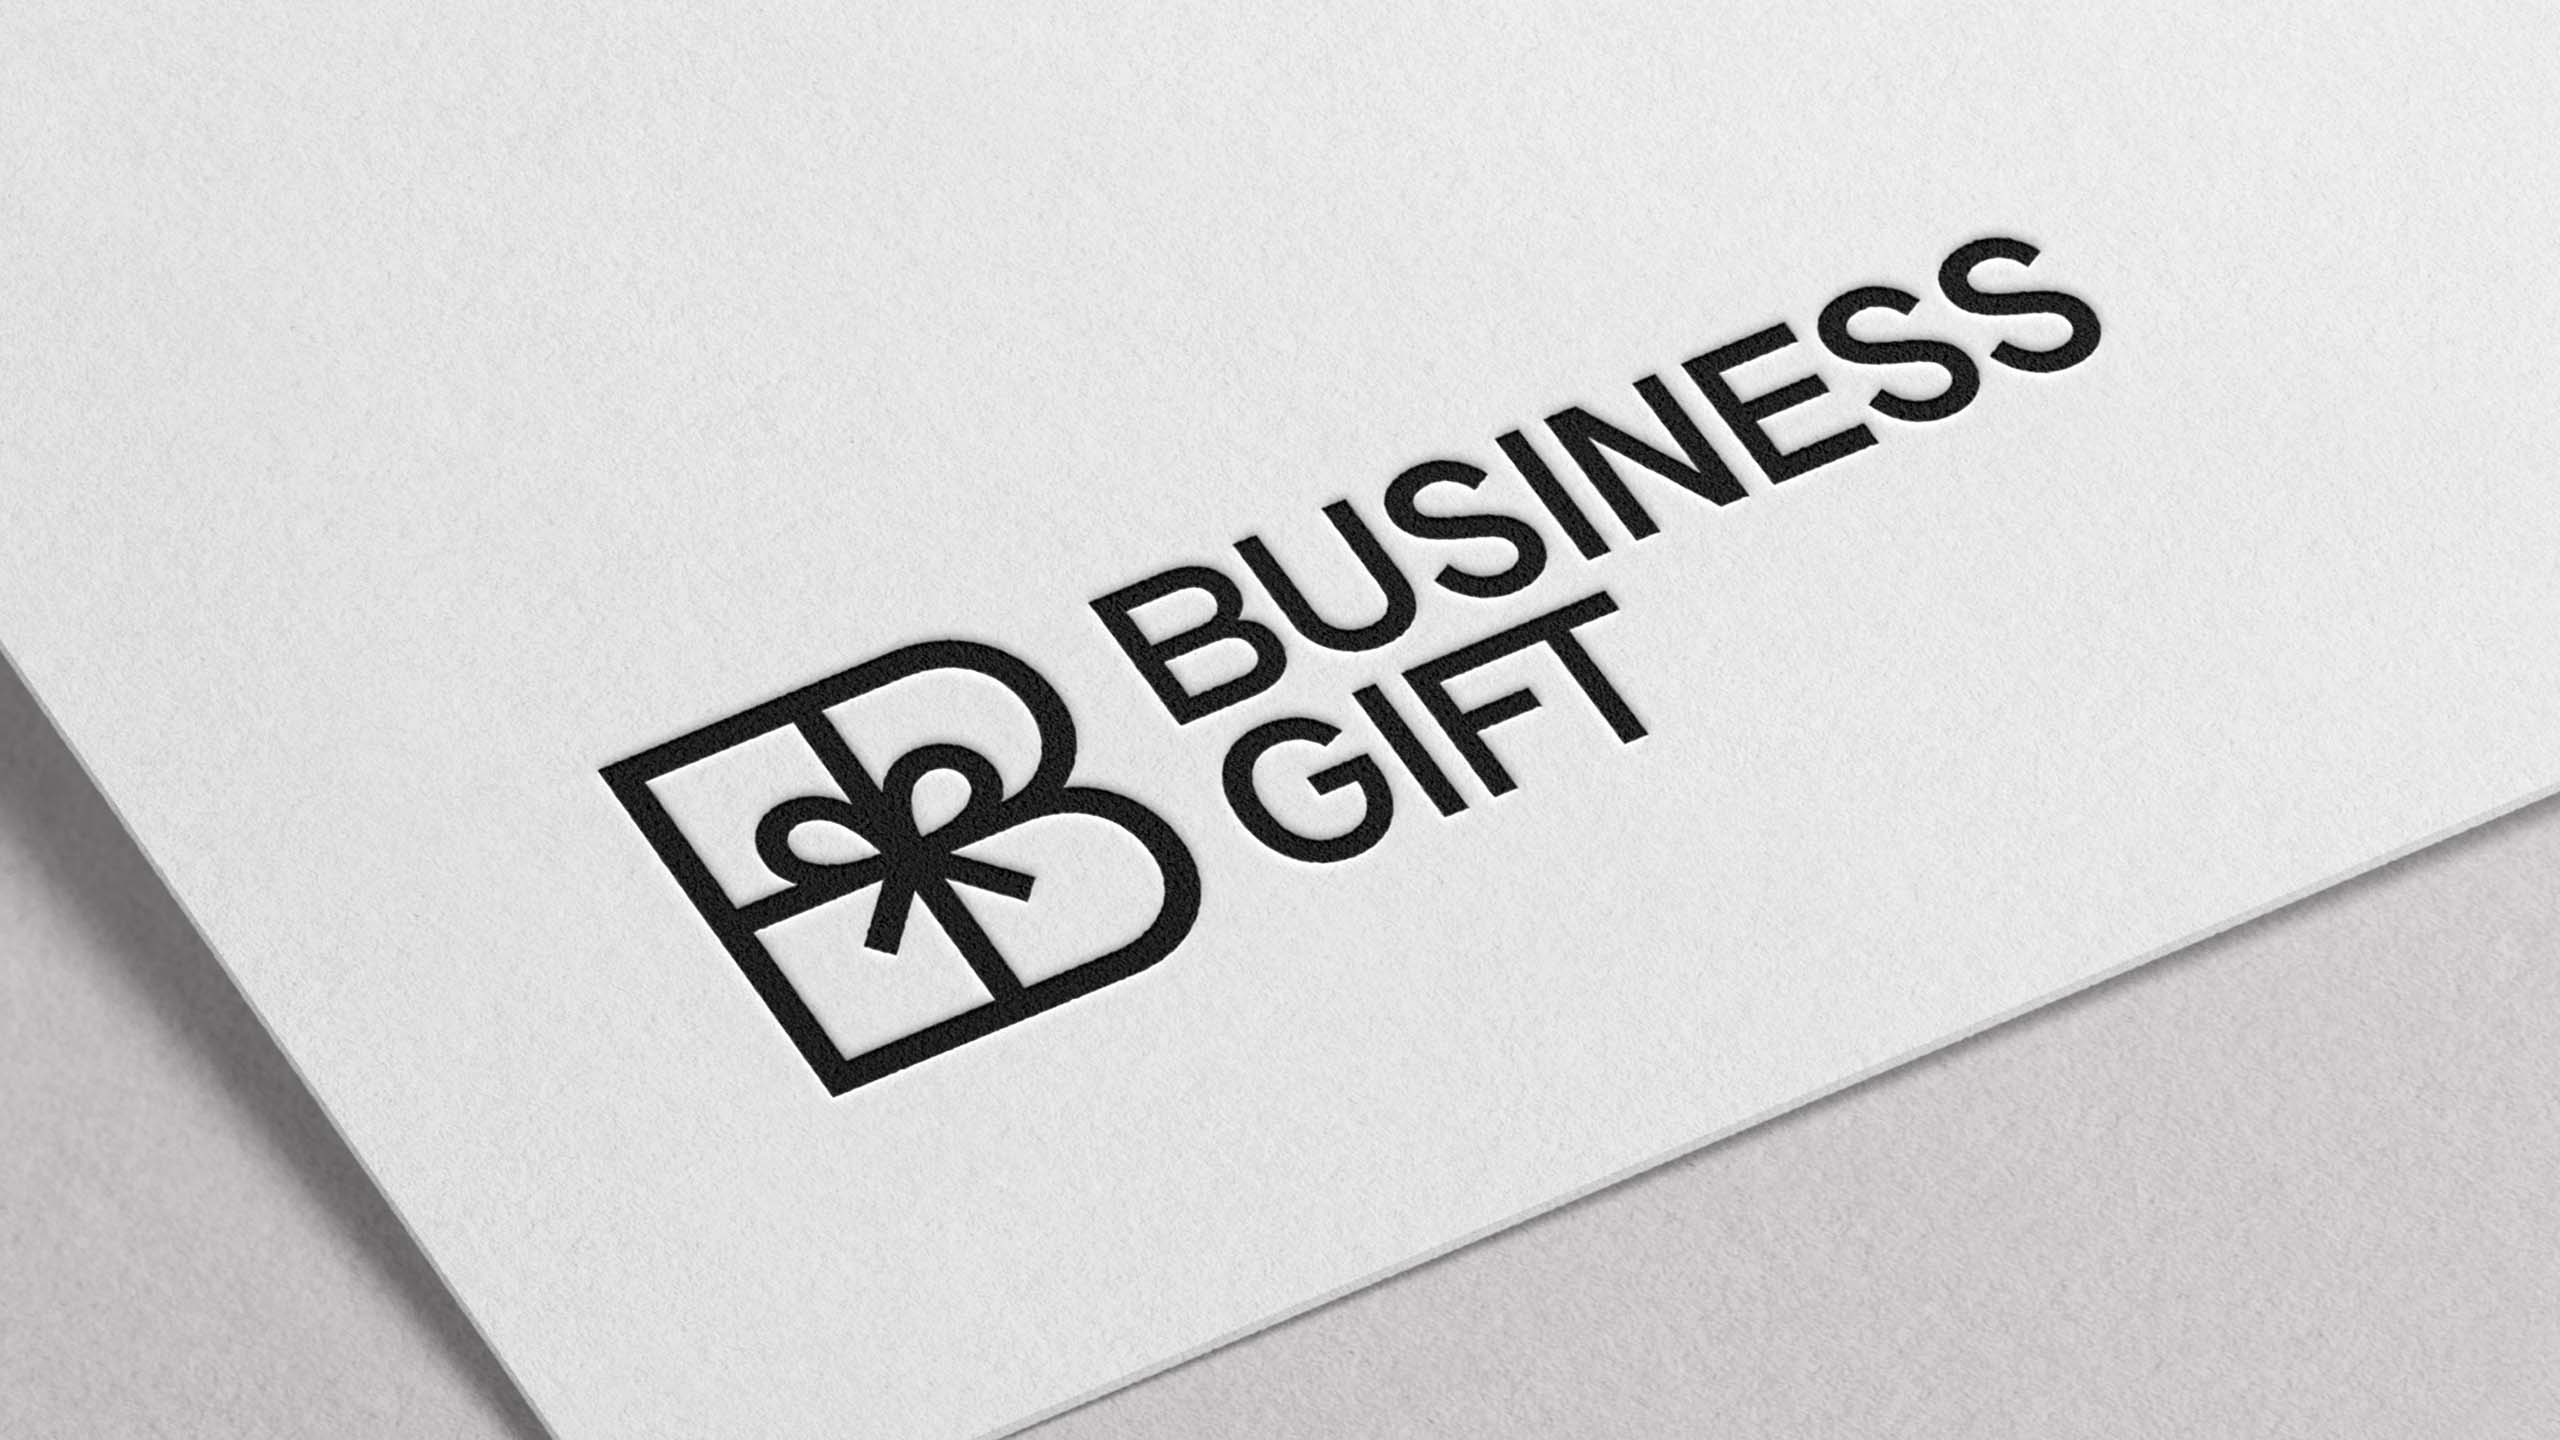 Closeup of the Business Gift logo.